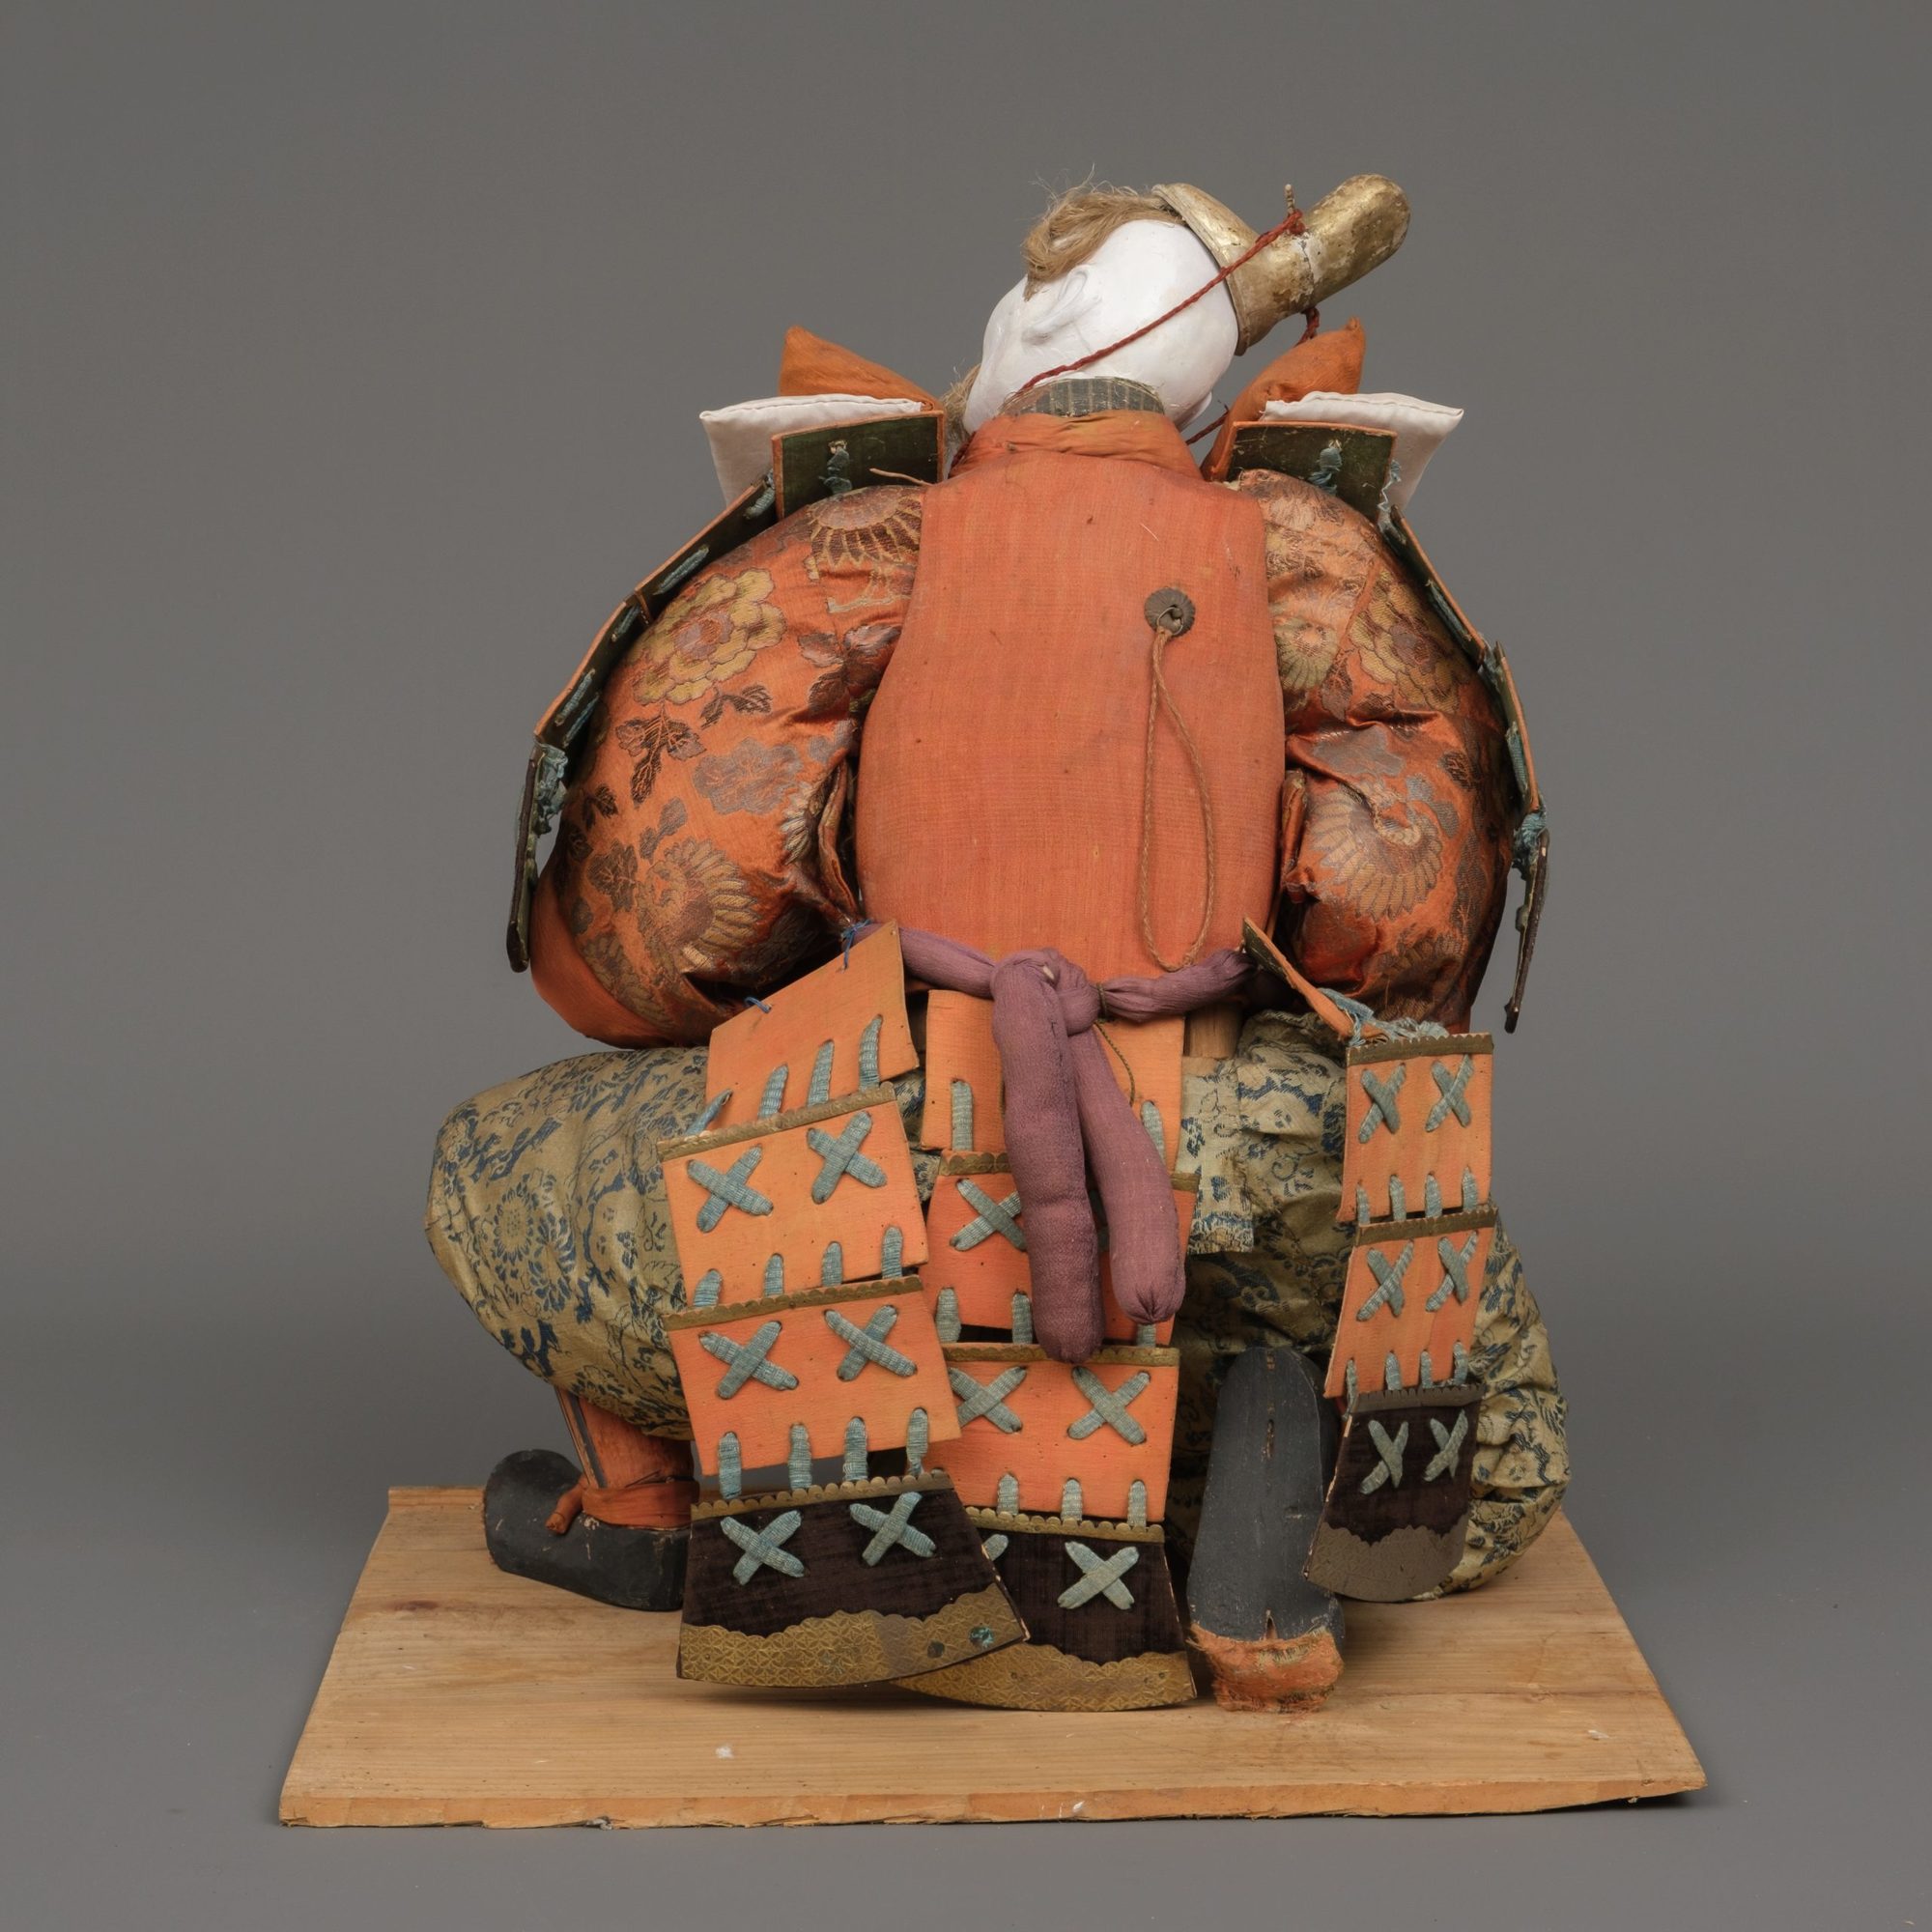 A LARGE JAPANESE HAND-CRAFTED WARRIOR DOLL, 18TH CENTURY - Image 4 of 6